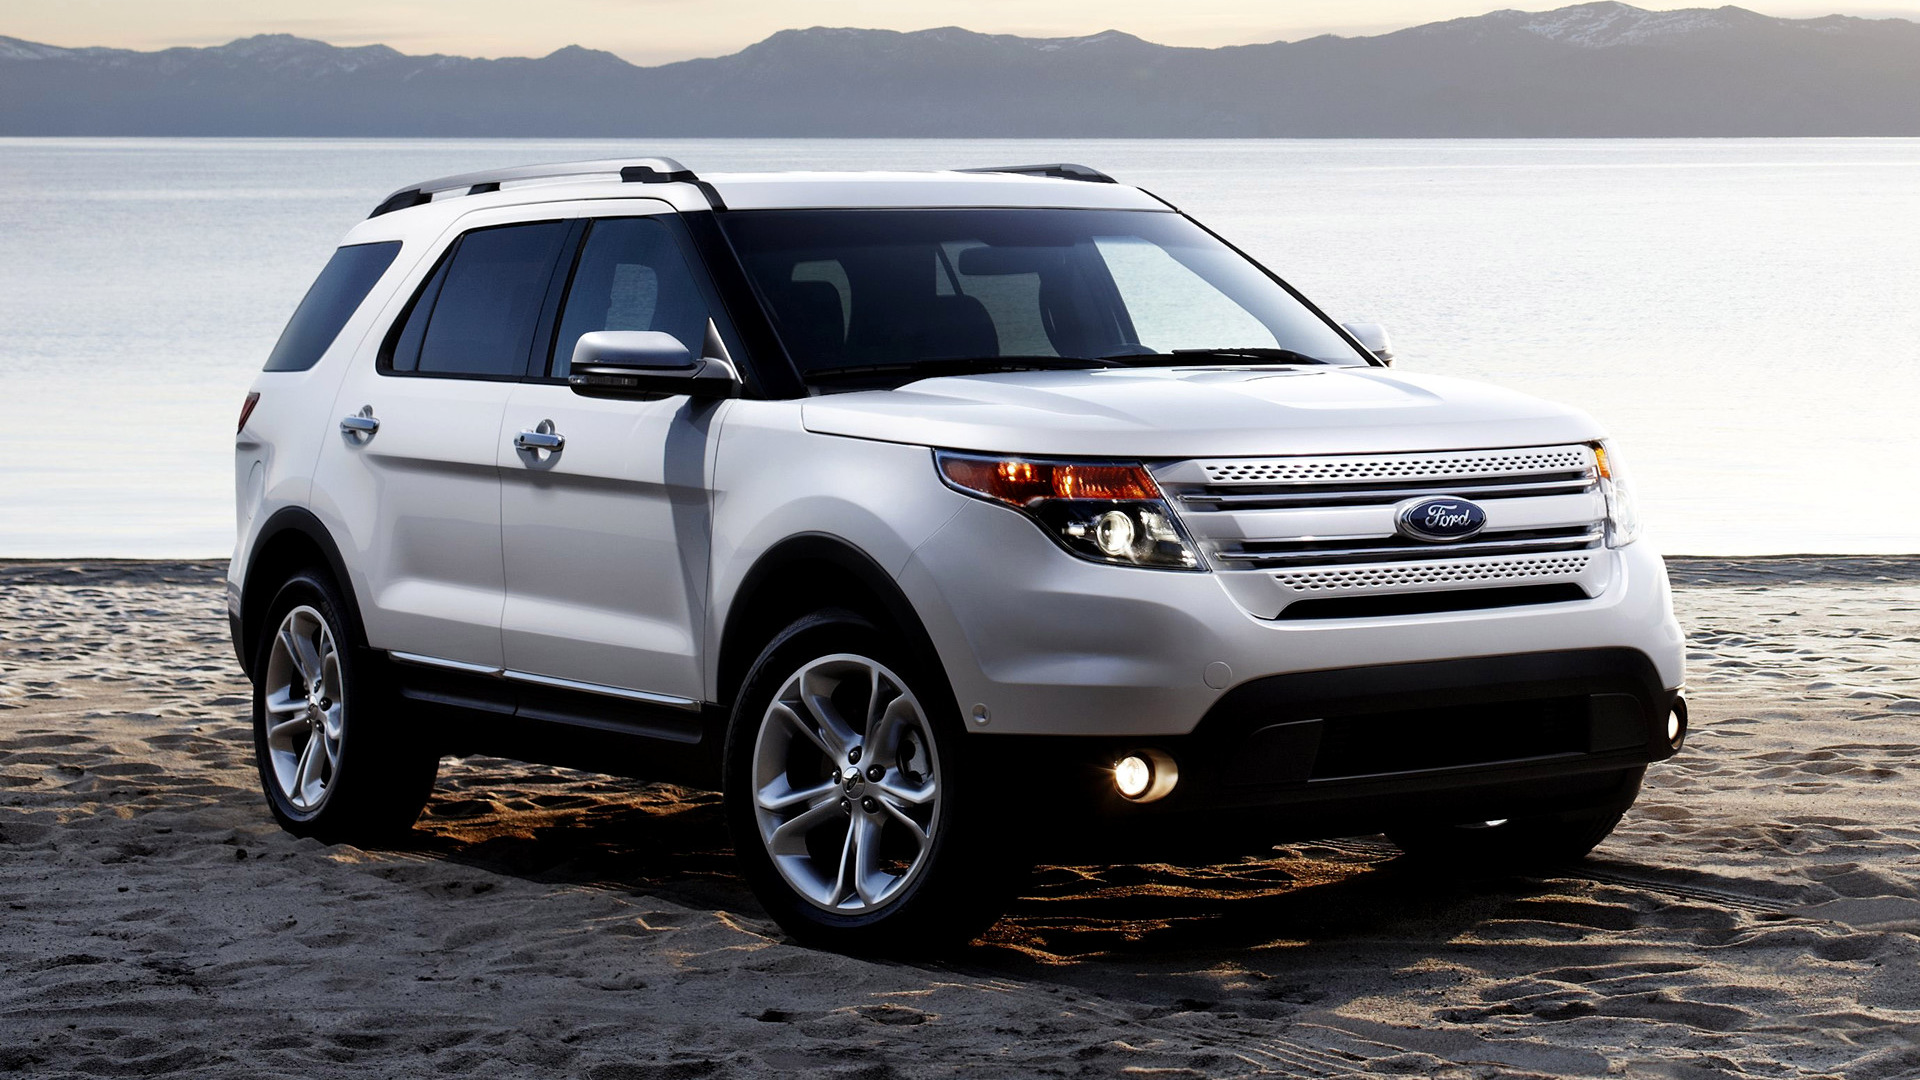 2010 Ford Explorer - Wallpapers and HD Images | Car Pixel